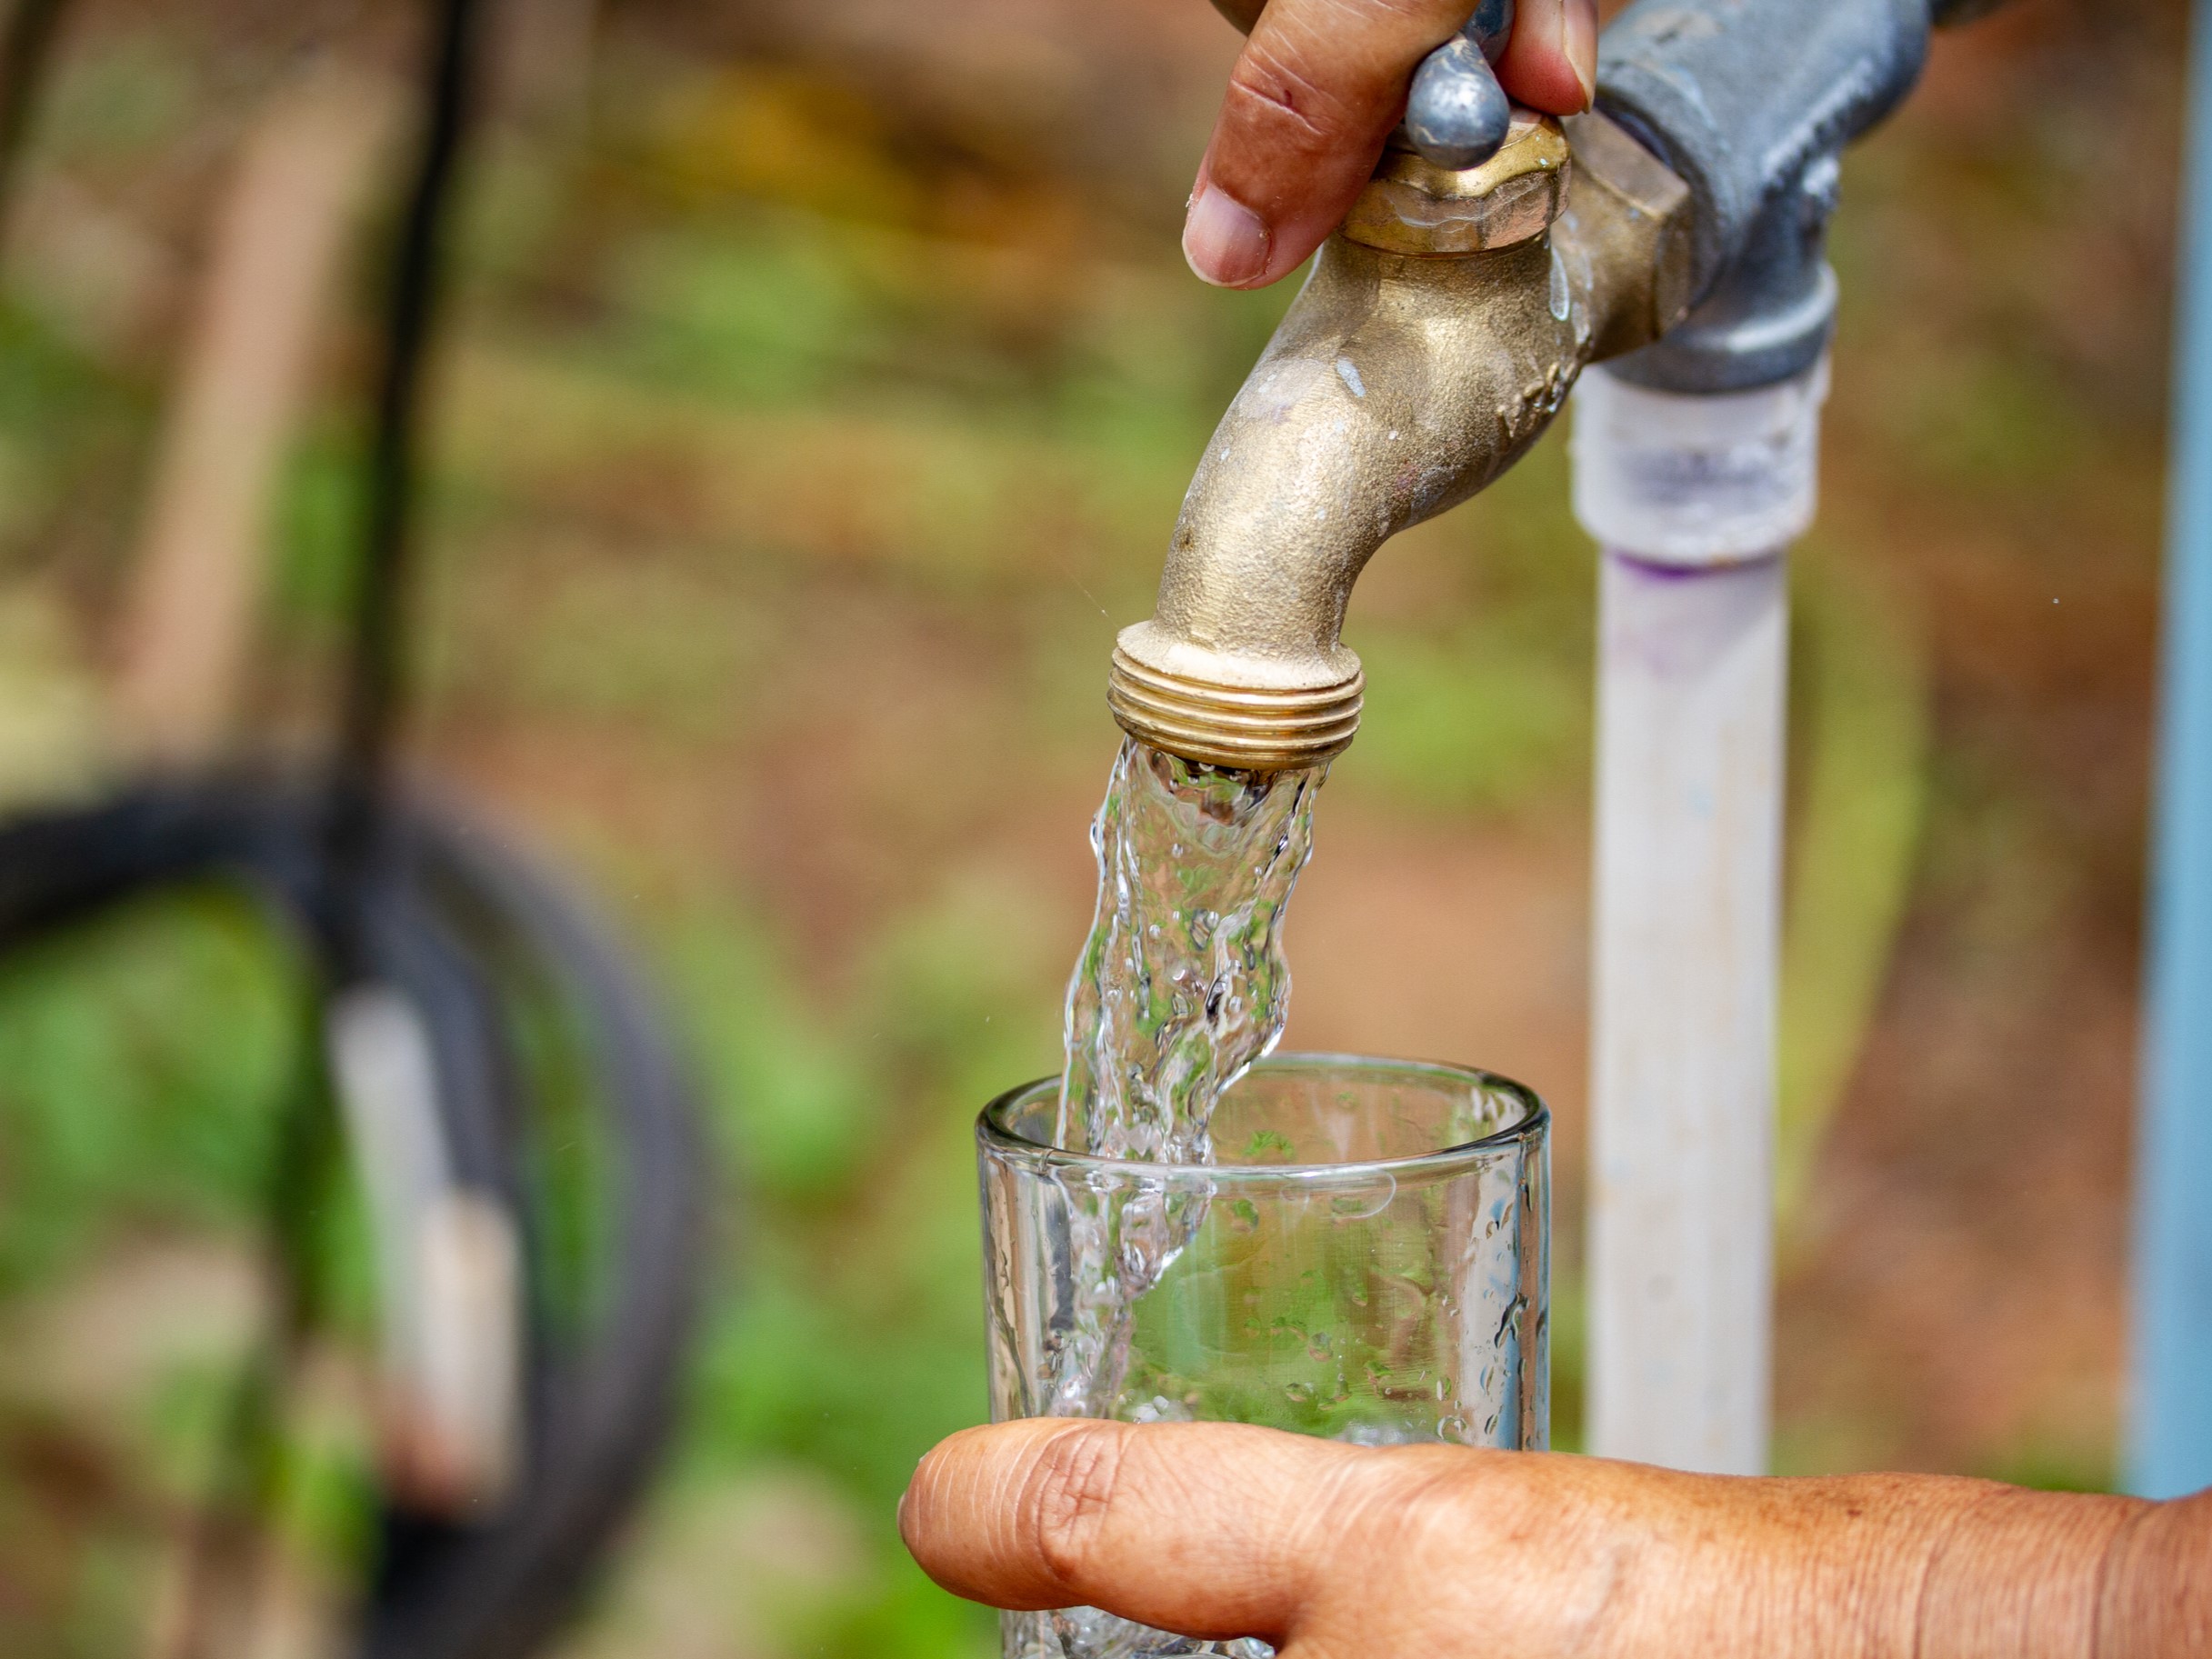 Clean water pouring into a glass from an outdoor spigot